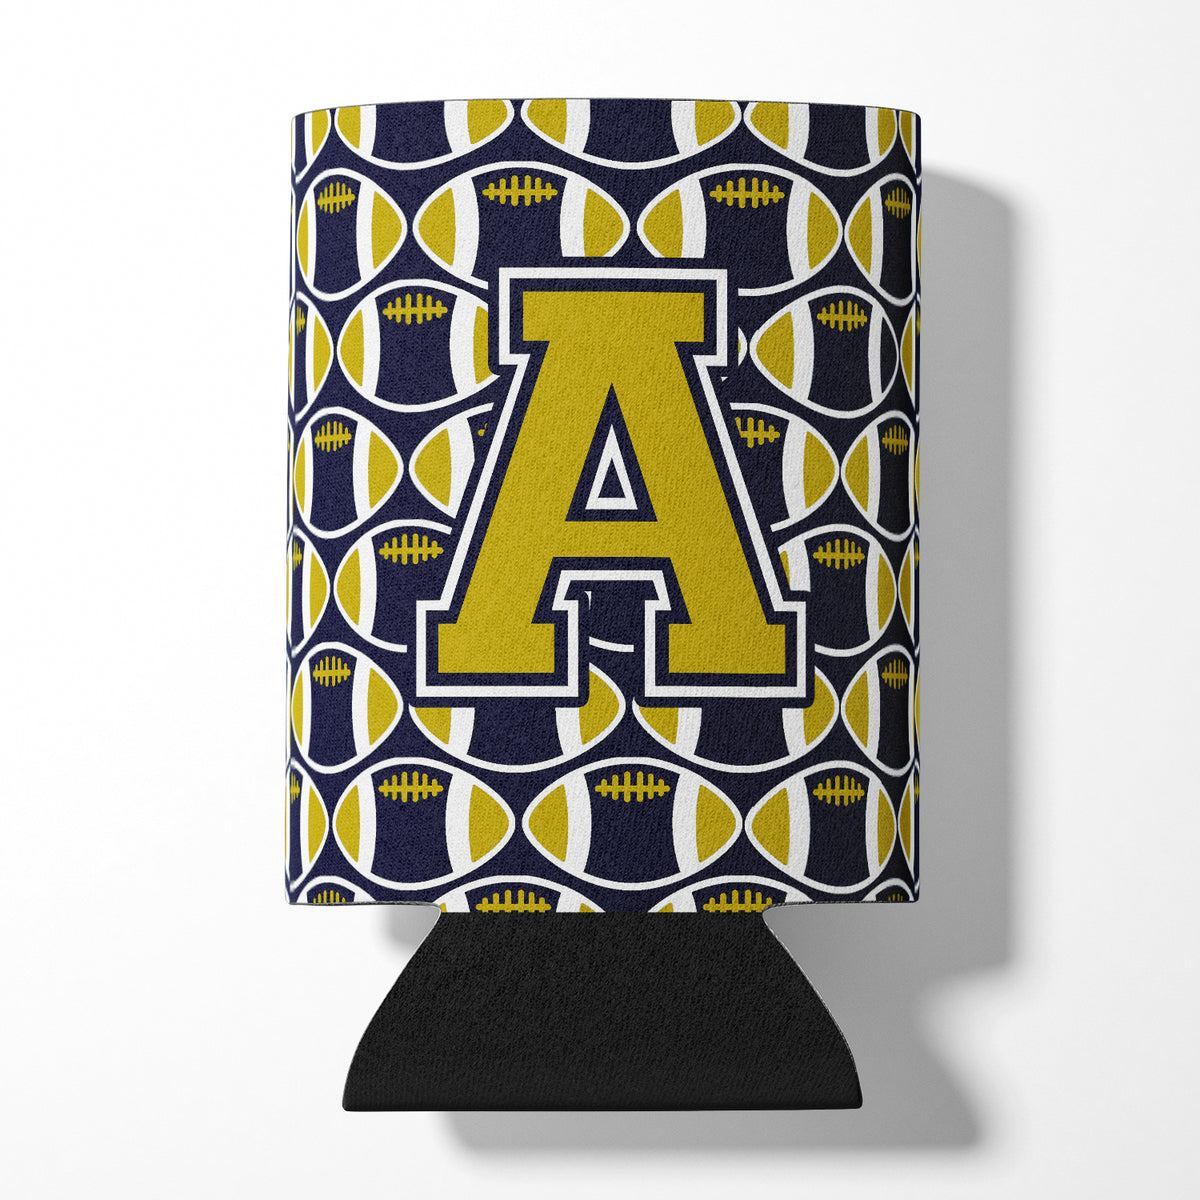 Letter A Football Blue and Gold Can or Bottle Hugger CJ1074-ACC.